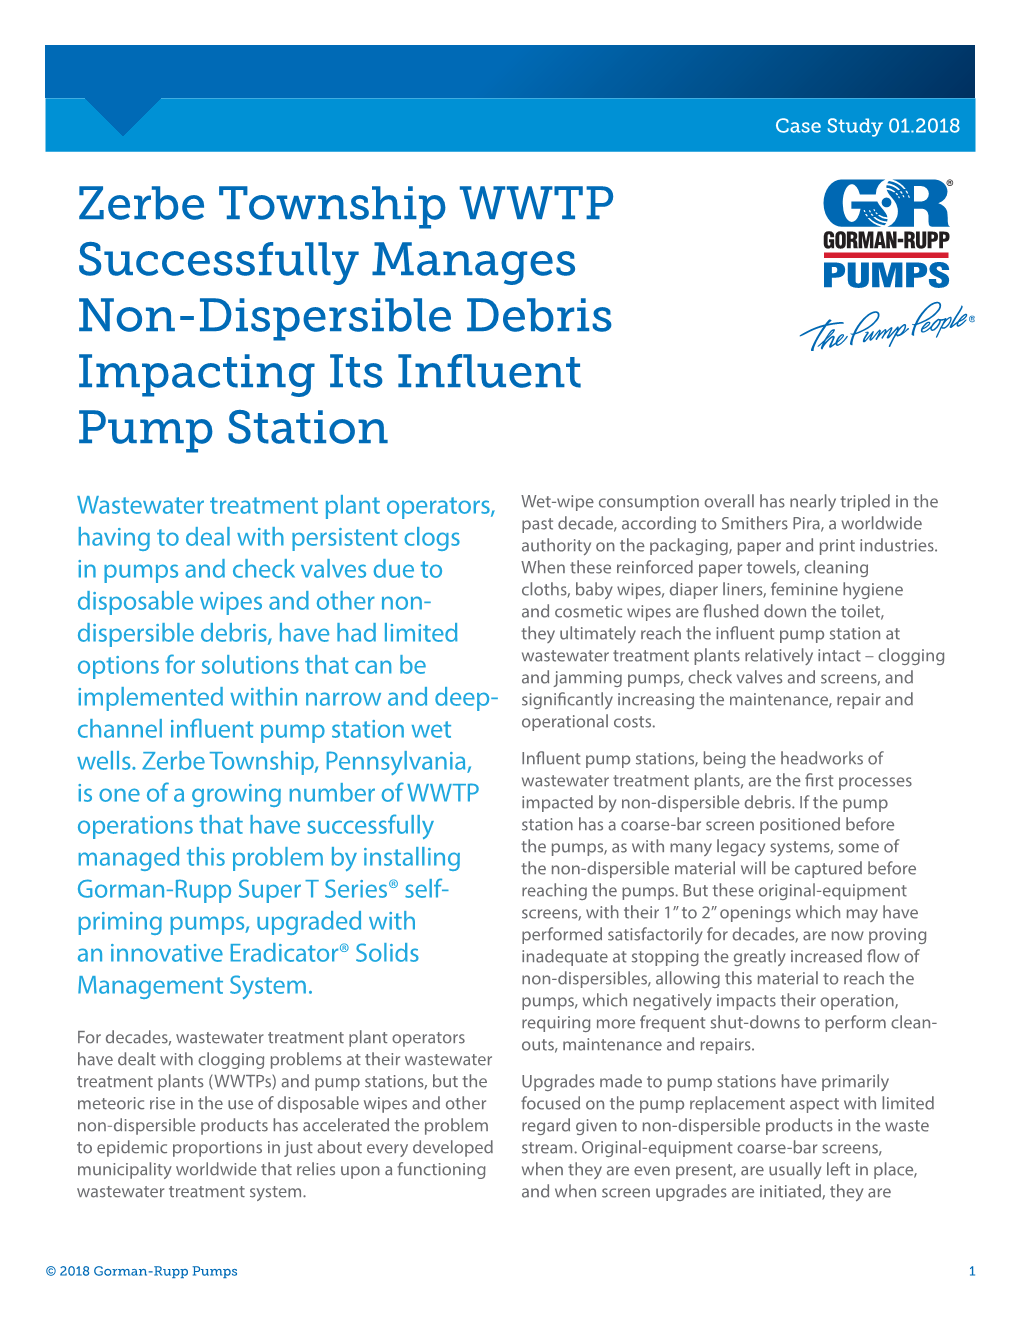 Zerbe Township WWTP Successfully Manages Non-Dispersible Debris Impacting Its Influent Pump Station